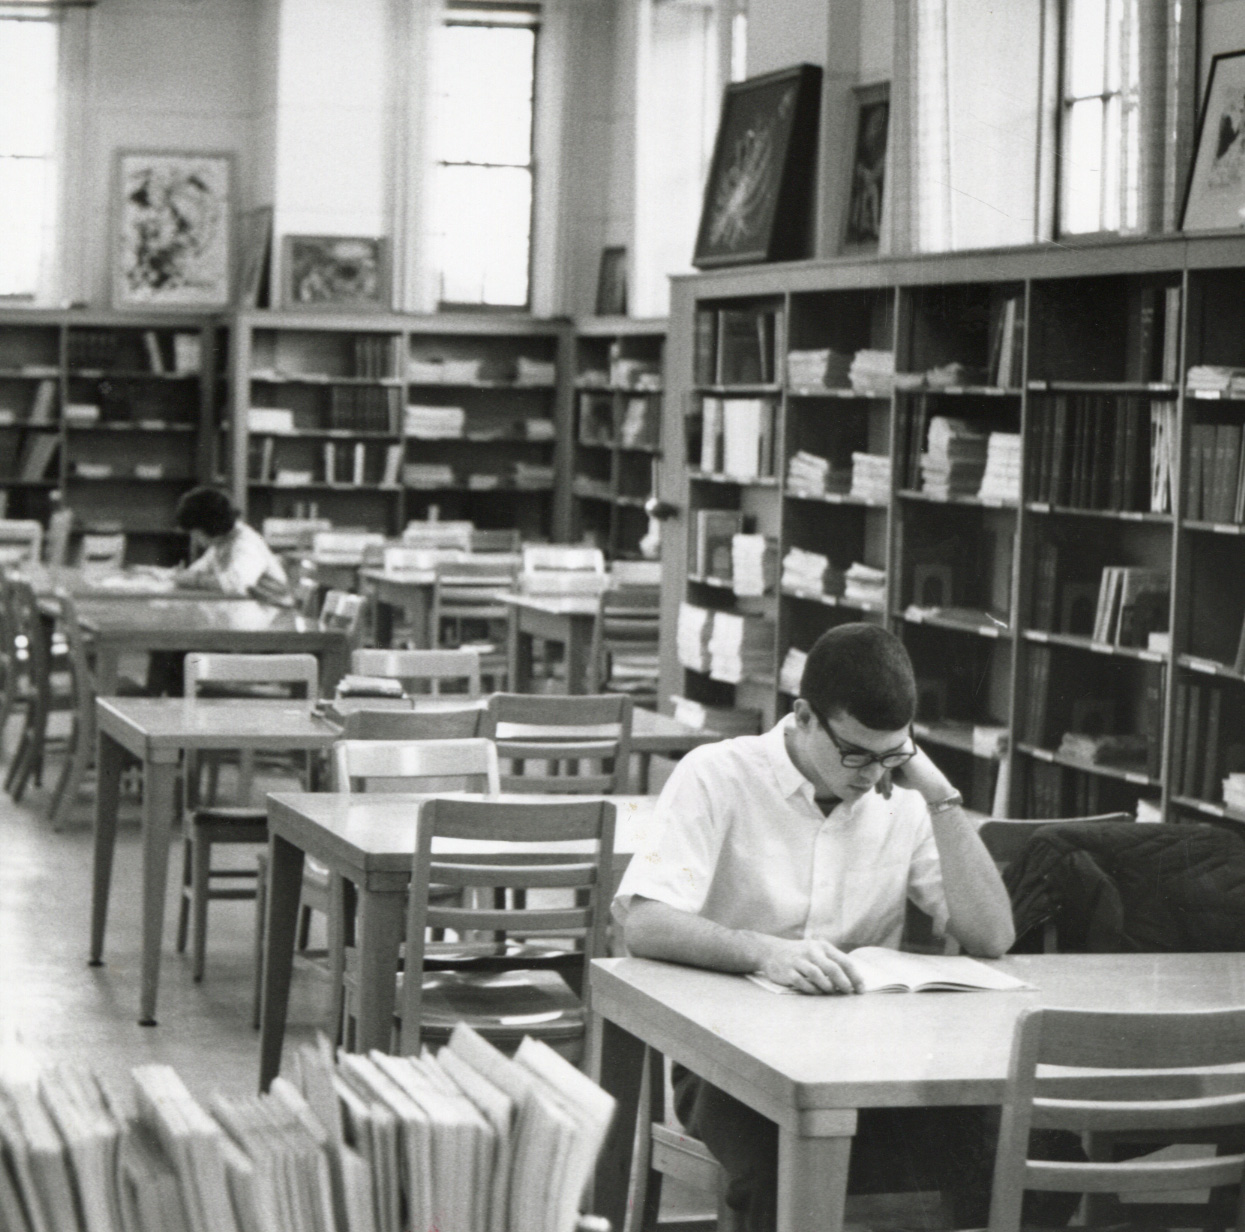 A student studies at a table in the library.